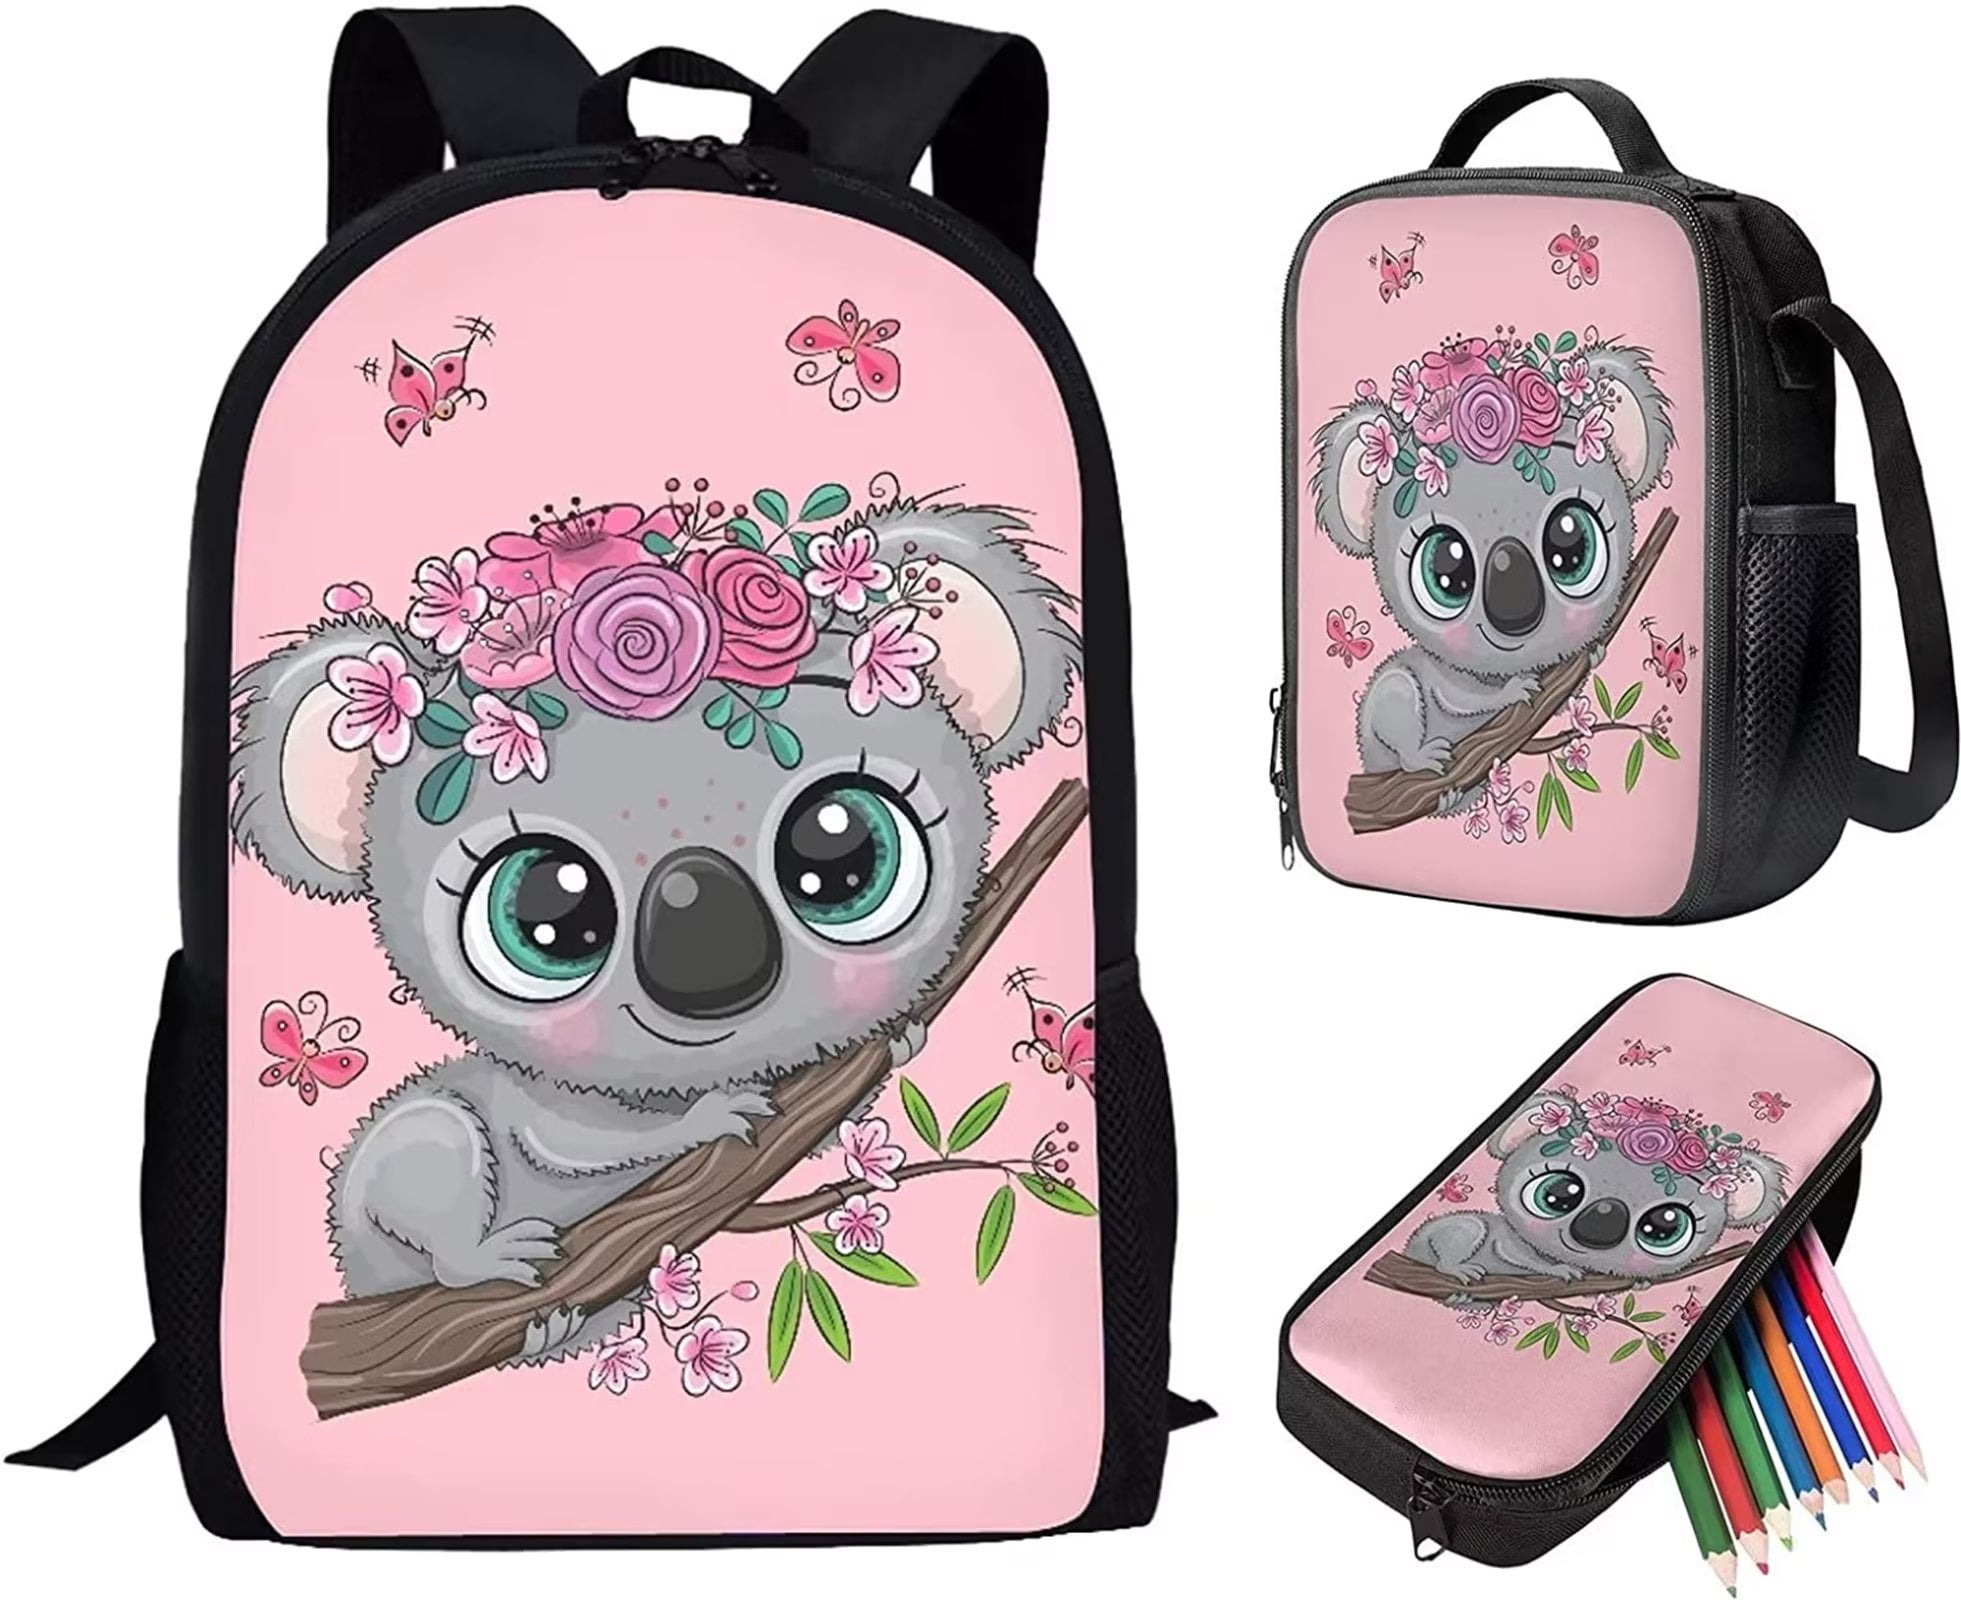 Binienty Sunflower Sloth Backpack for School Boys Middle School Bag for Girls Bookbags with Lunch Box Ages 8-10 Pencil Case Elementary School Supplies